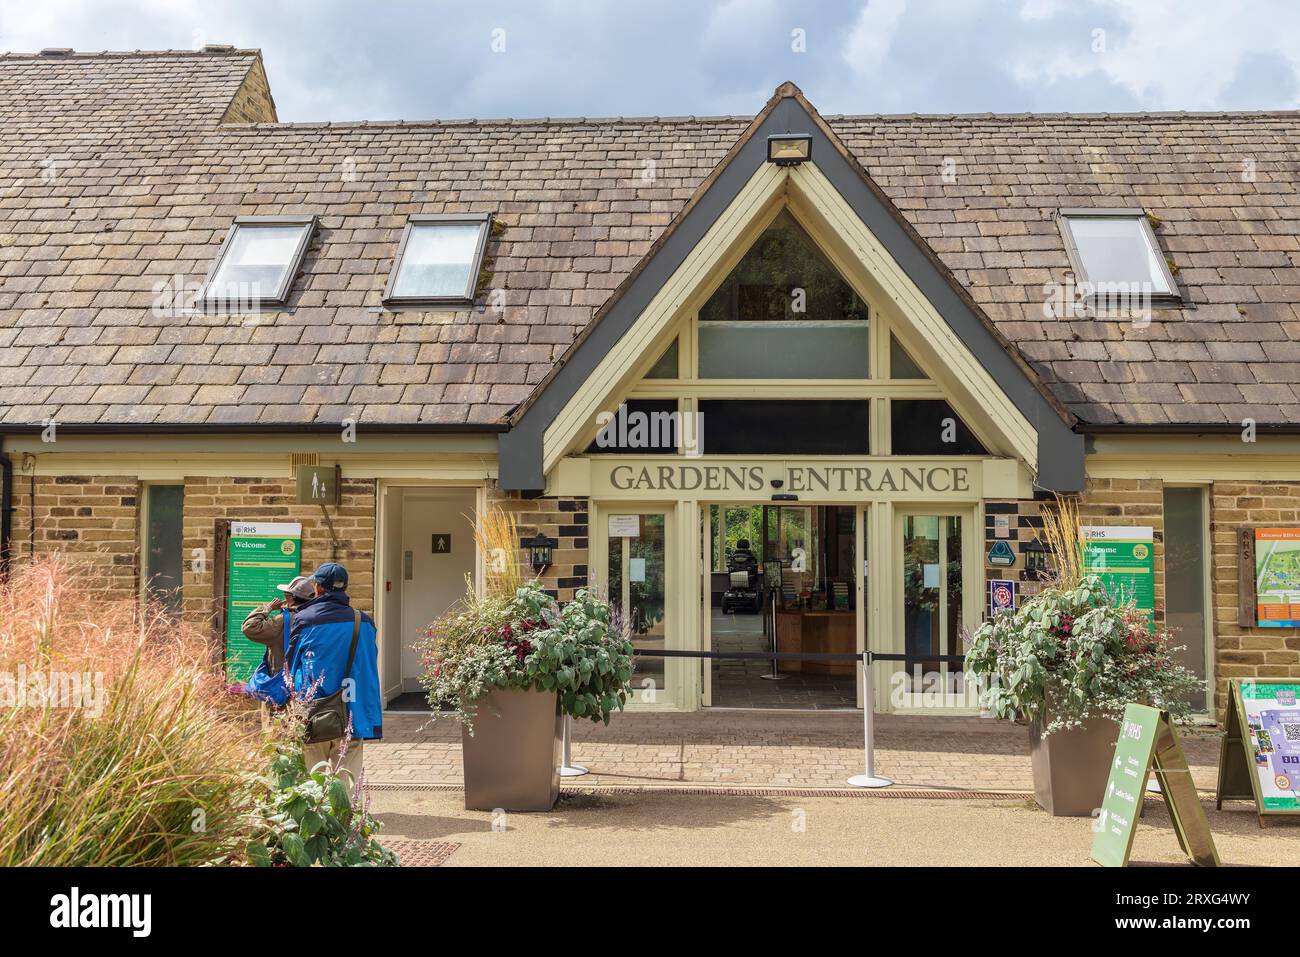 Entrance building to the The Royal Horticultural Society gardens in Harlow Carr, part of the UK's leading gardening charity. Stock Photo